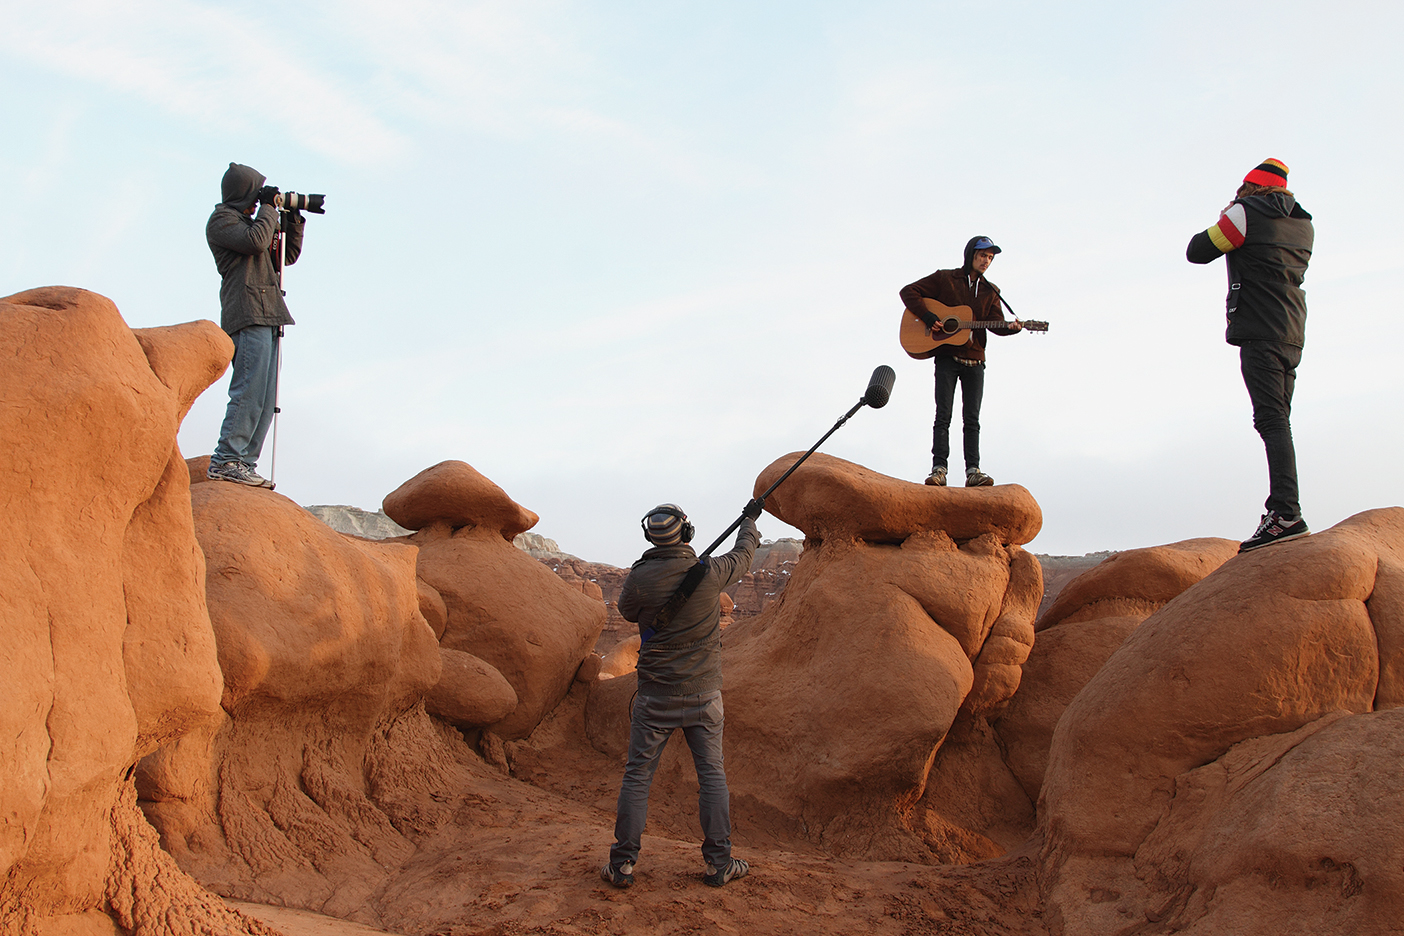 crew members film and hold mikes as a guitar player stands on a rock performing